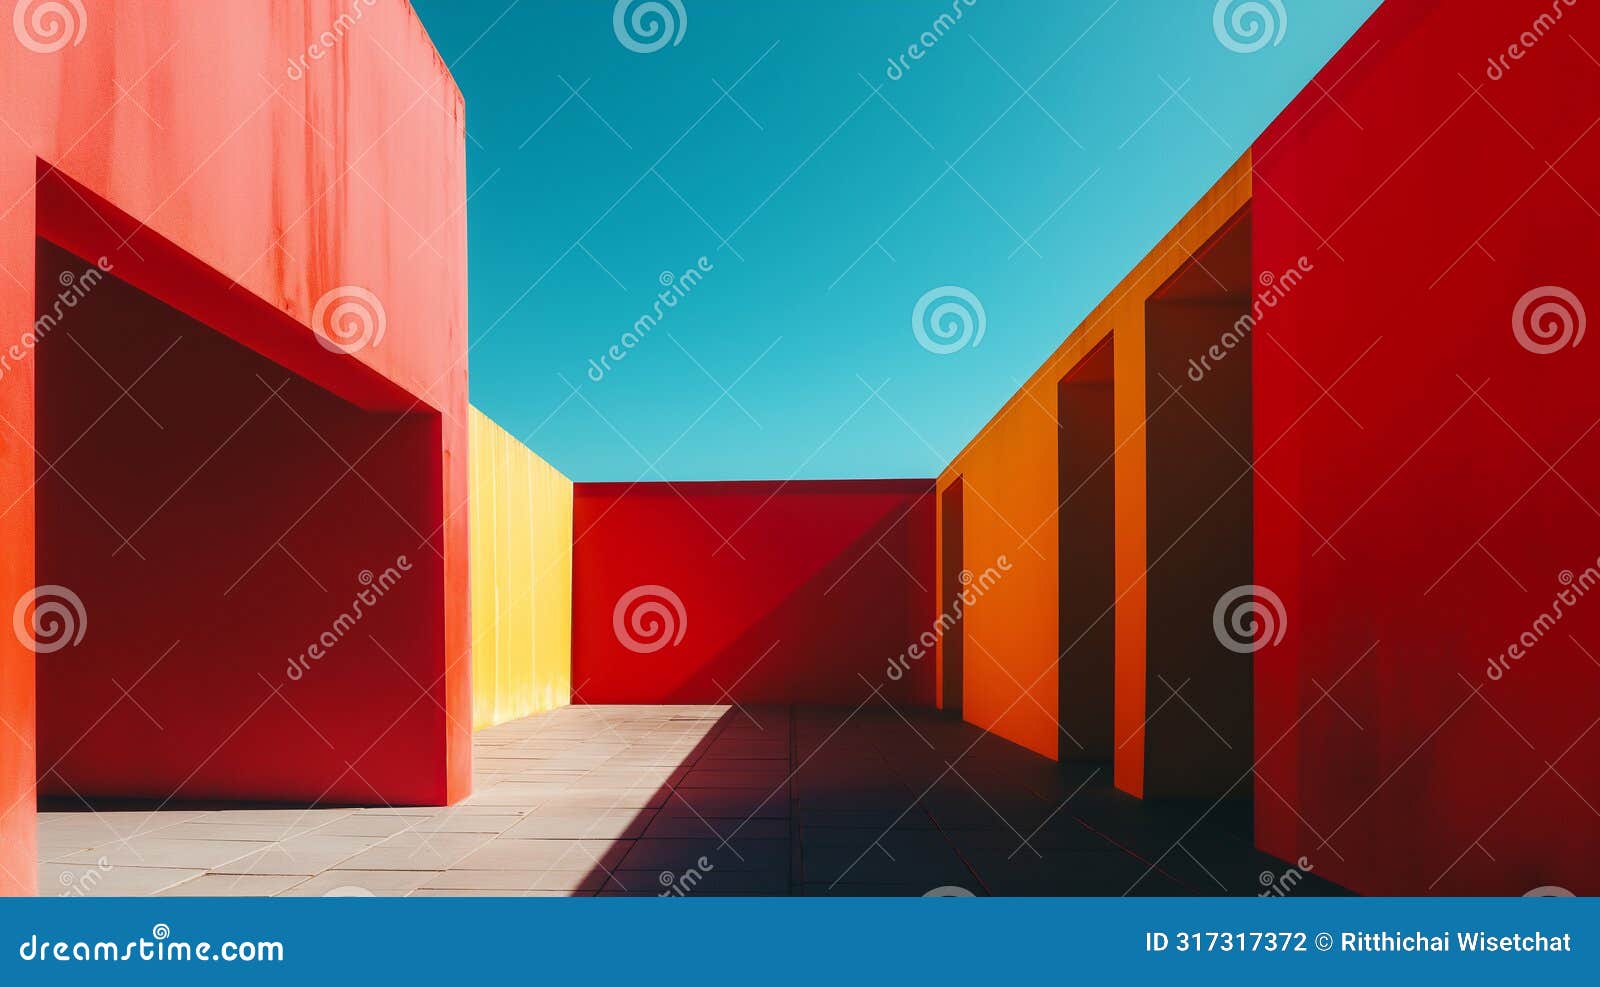 bold geometric architecture featuring vibrant red and orange walls under a clear blue sky, creating strong visual contrasts and